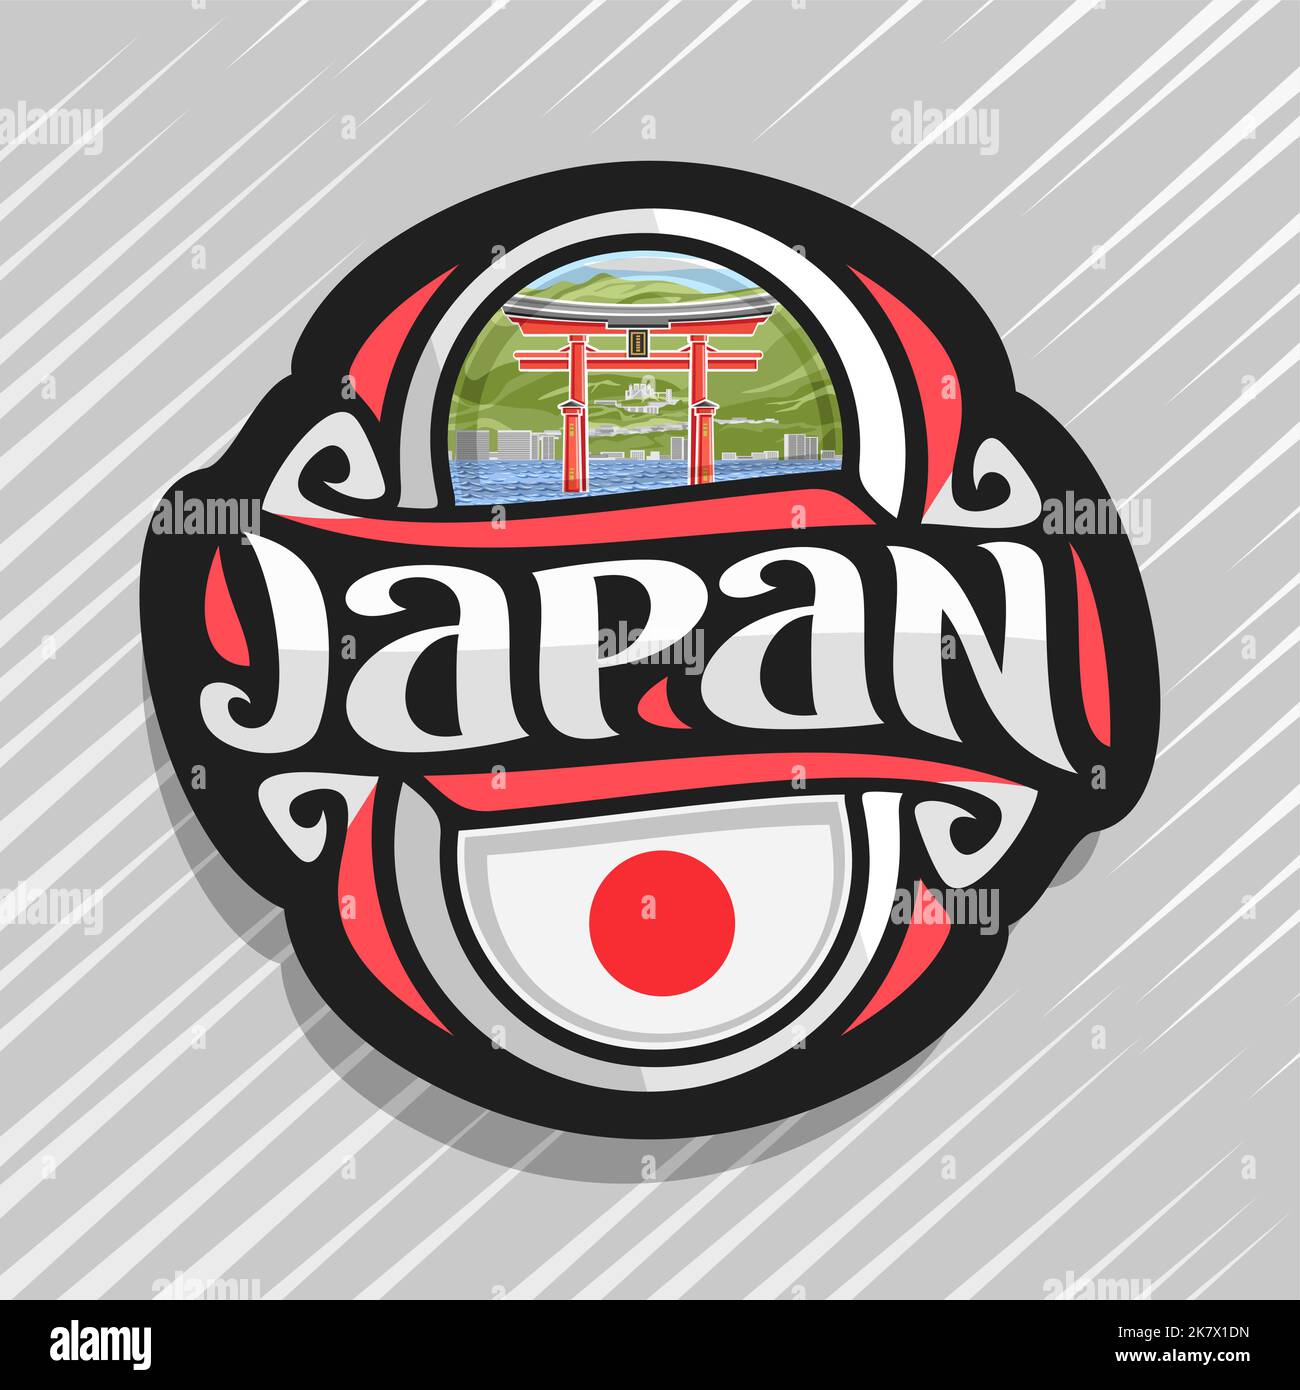 Vector logo for Japan country, fridge magnet with japanese state flag, original brush typeface for word japan and national japanese symbol - floating Stock Vector